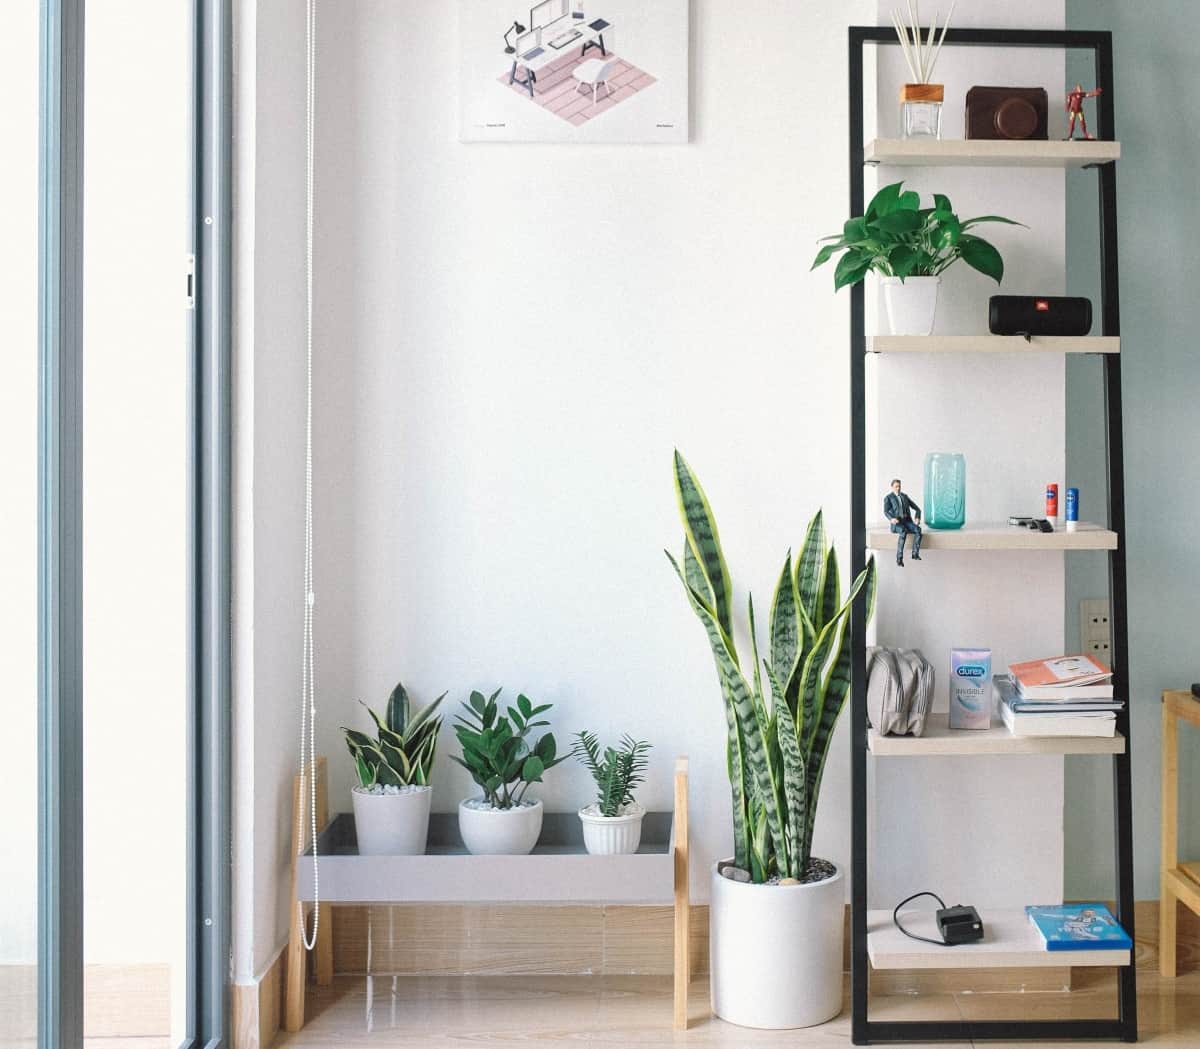 An apartment's house plants sitting next to a modern bookshelf with an assortment of items.